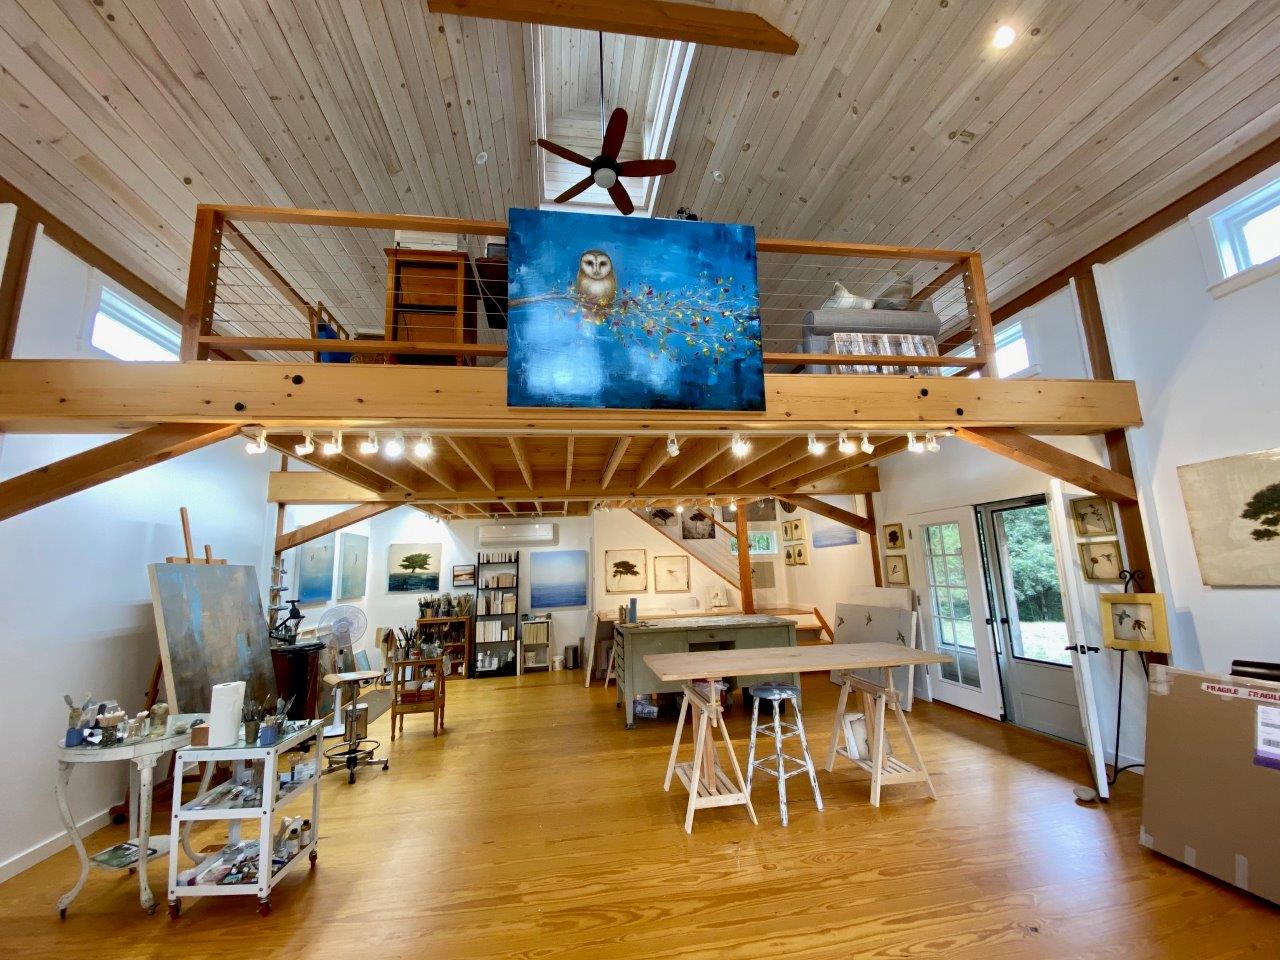 A picture of Jessica Pisano's art studio, designed and built by Geobarns, with a floating loft for an office and several of her paintings on display.